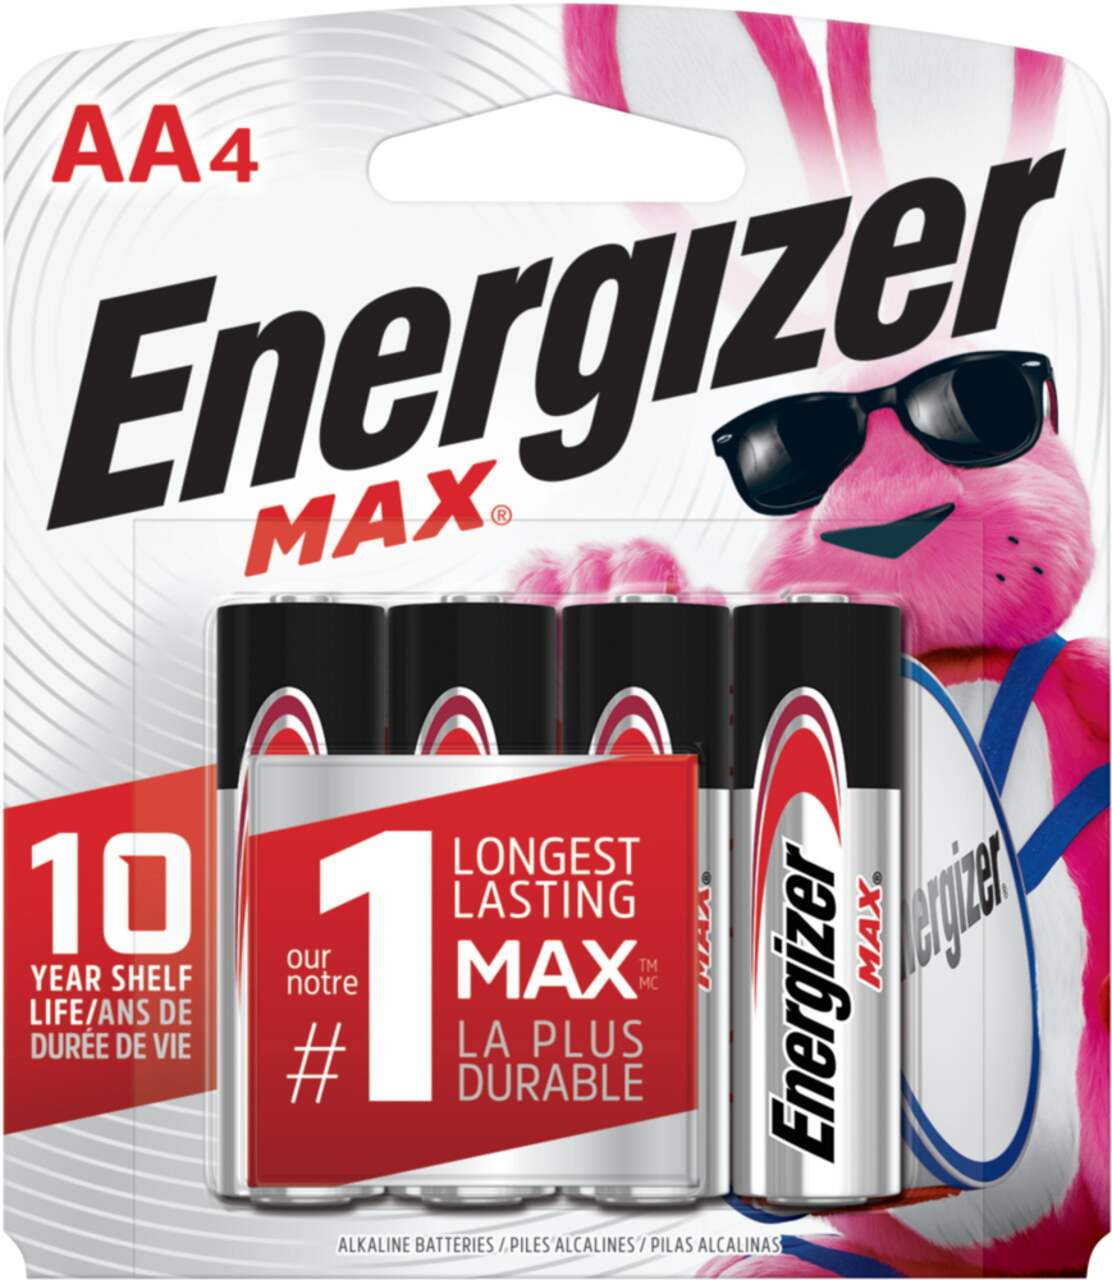 Energizer Max AA 4 Pack - Tesco Groceries